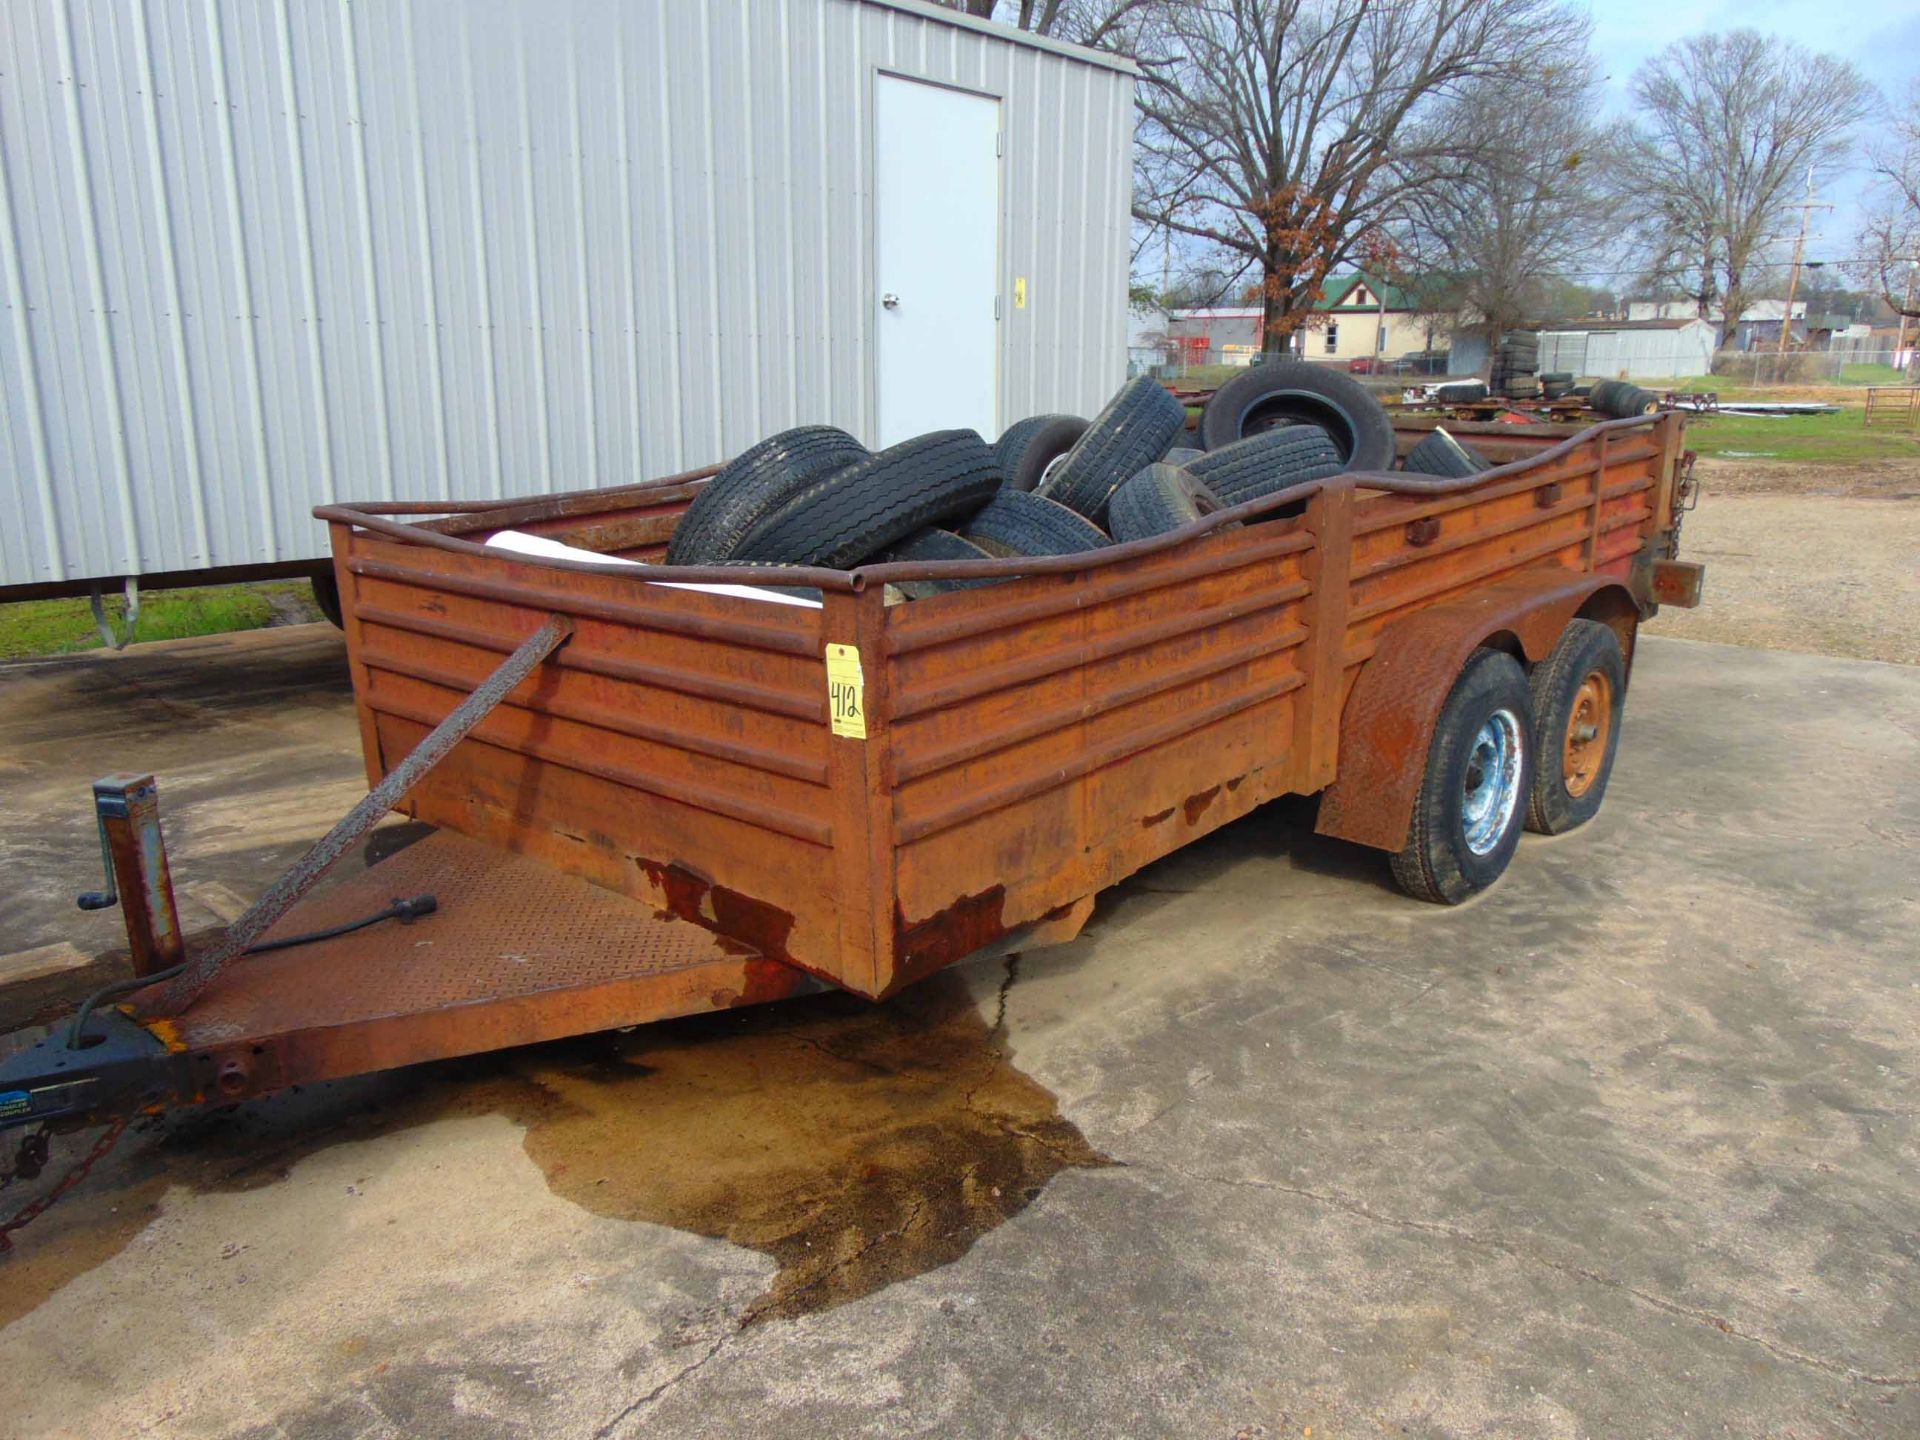 UTILITY TRAILER, 14' x 6' steel bed, tandem axle, TX License No. 866095J, VIN N.A. (cannot be